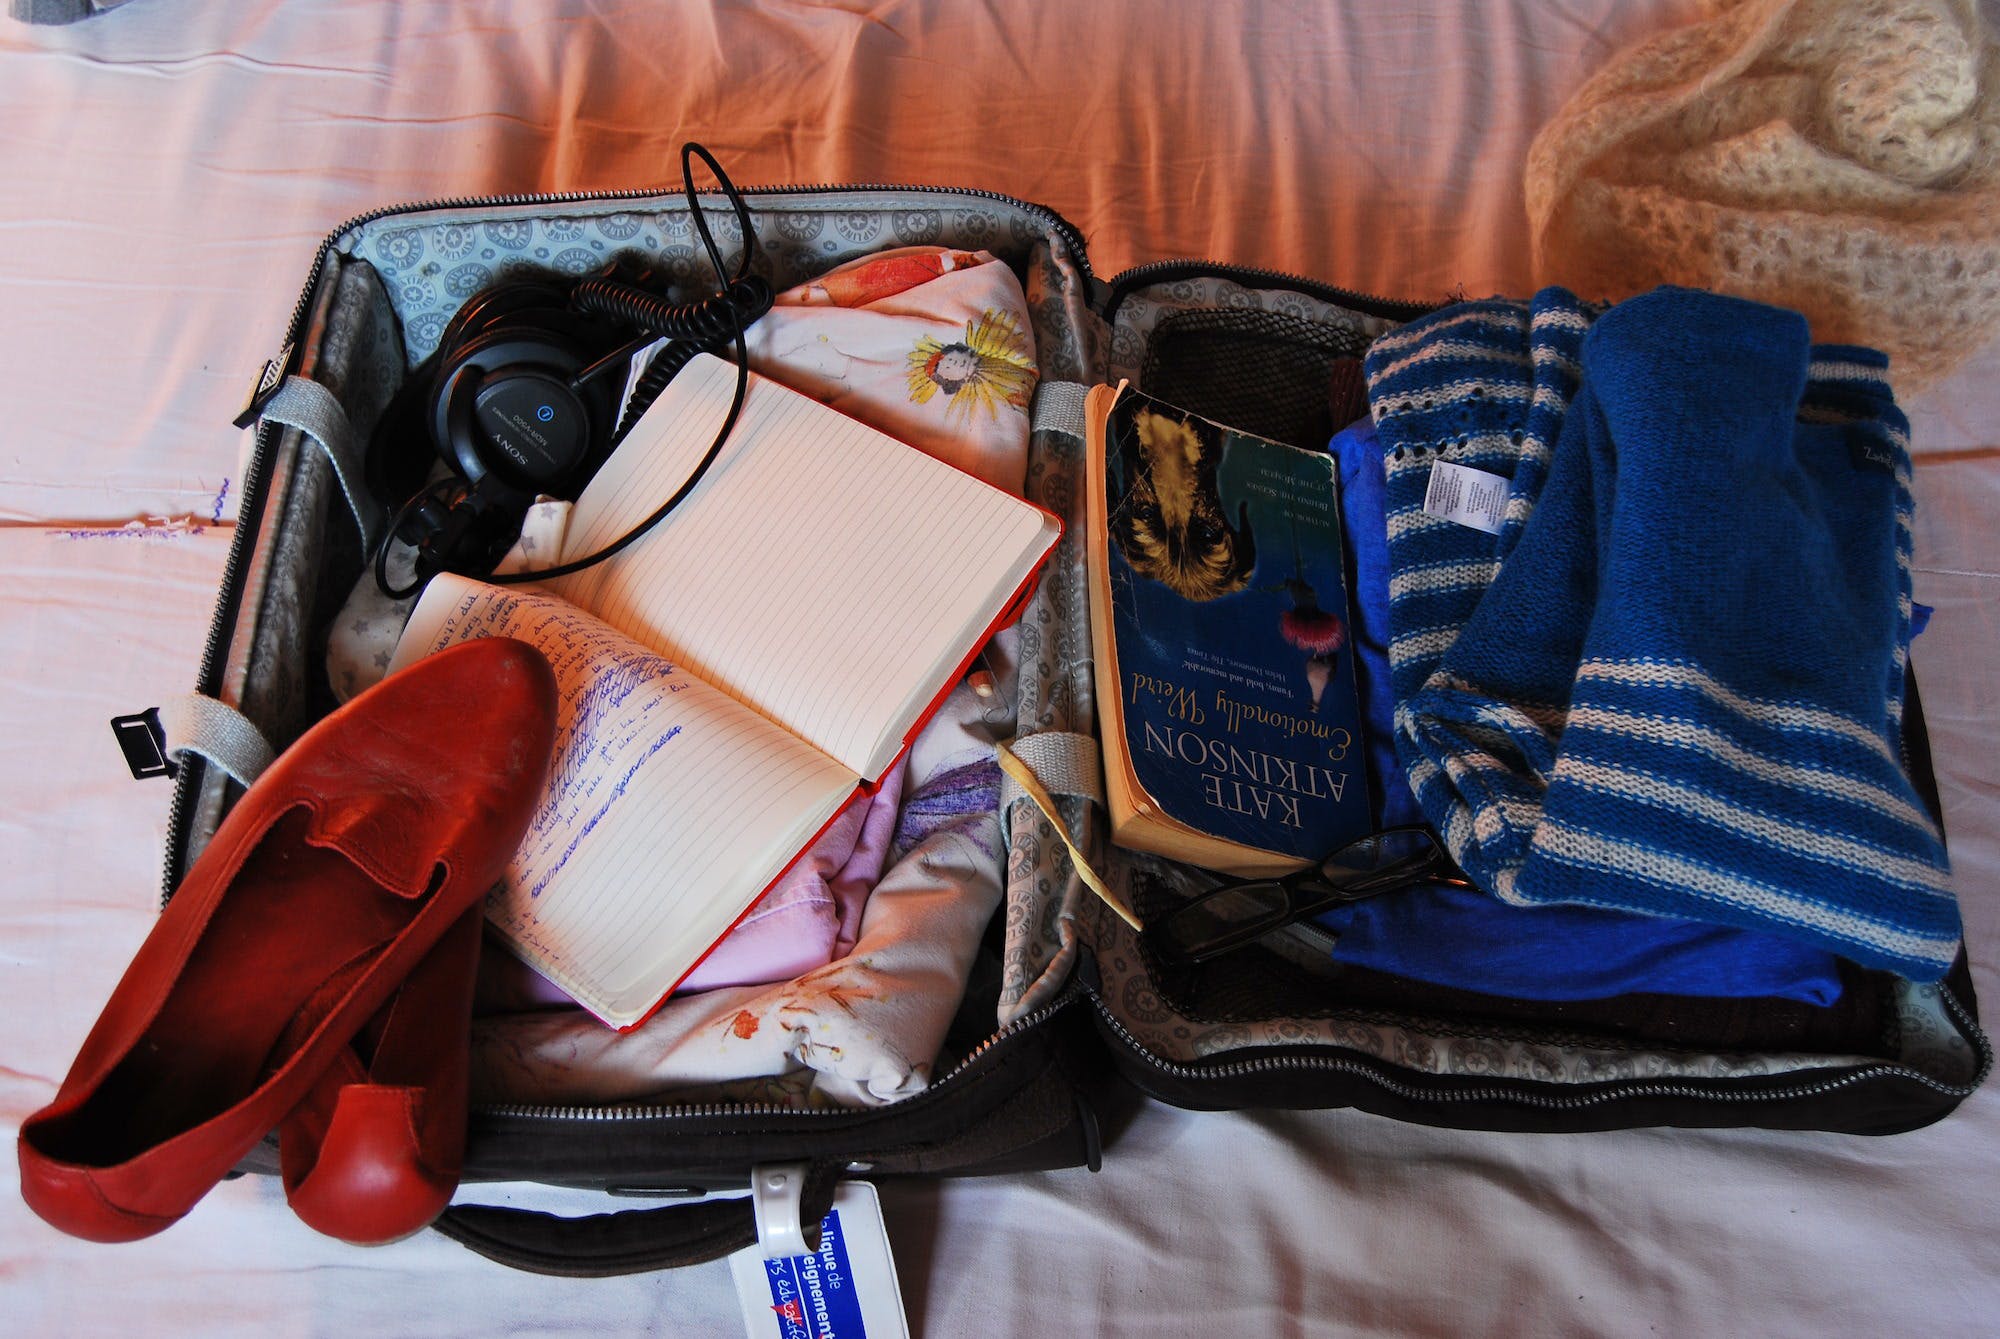 How to pack a suitcase: Packing tips and products you need